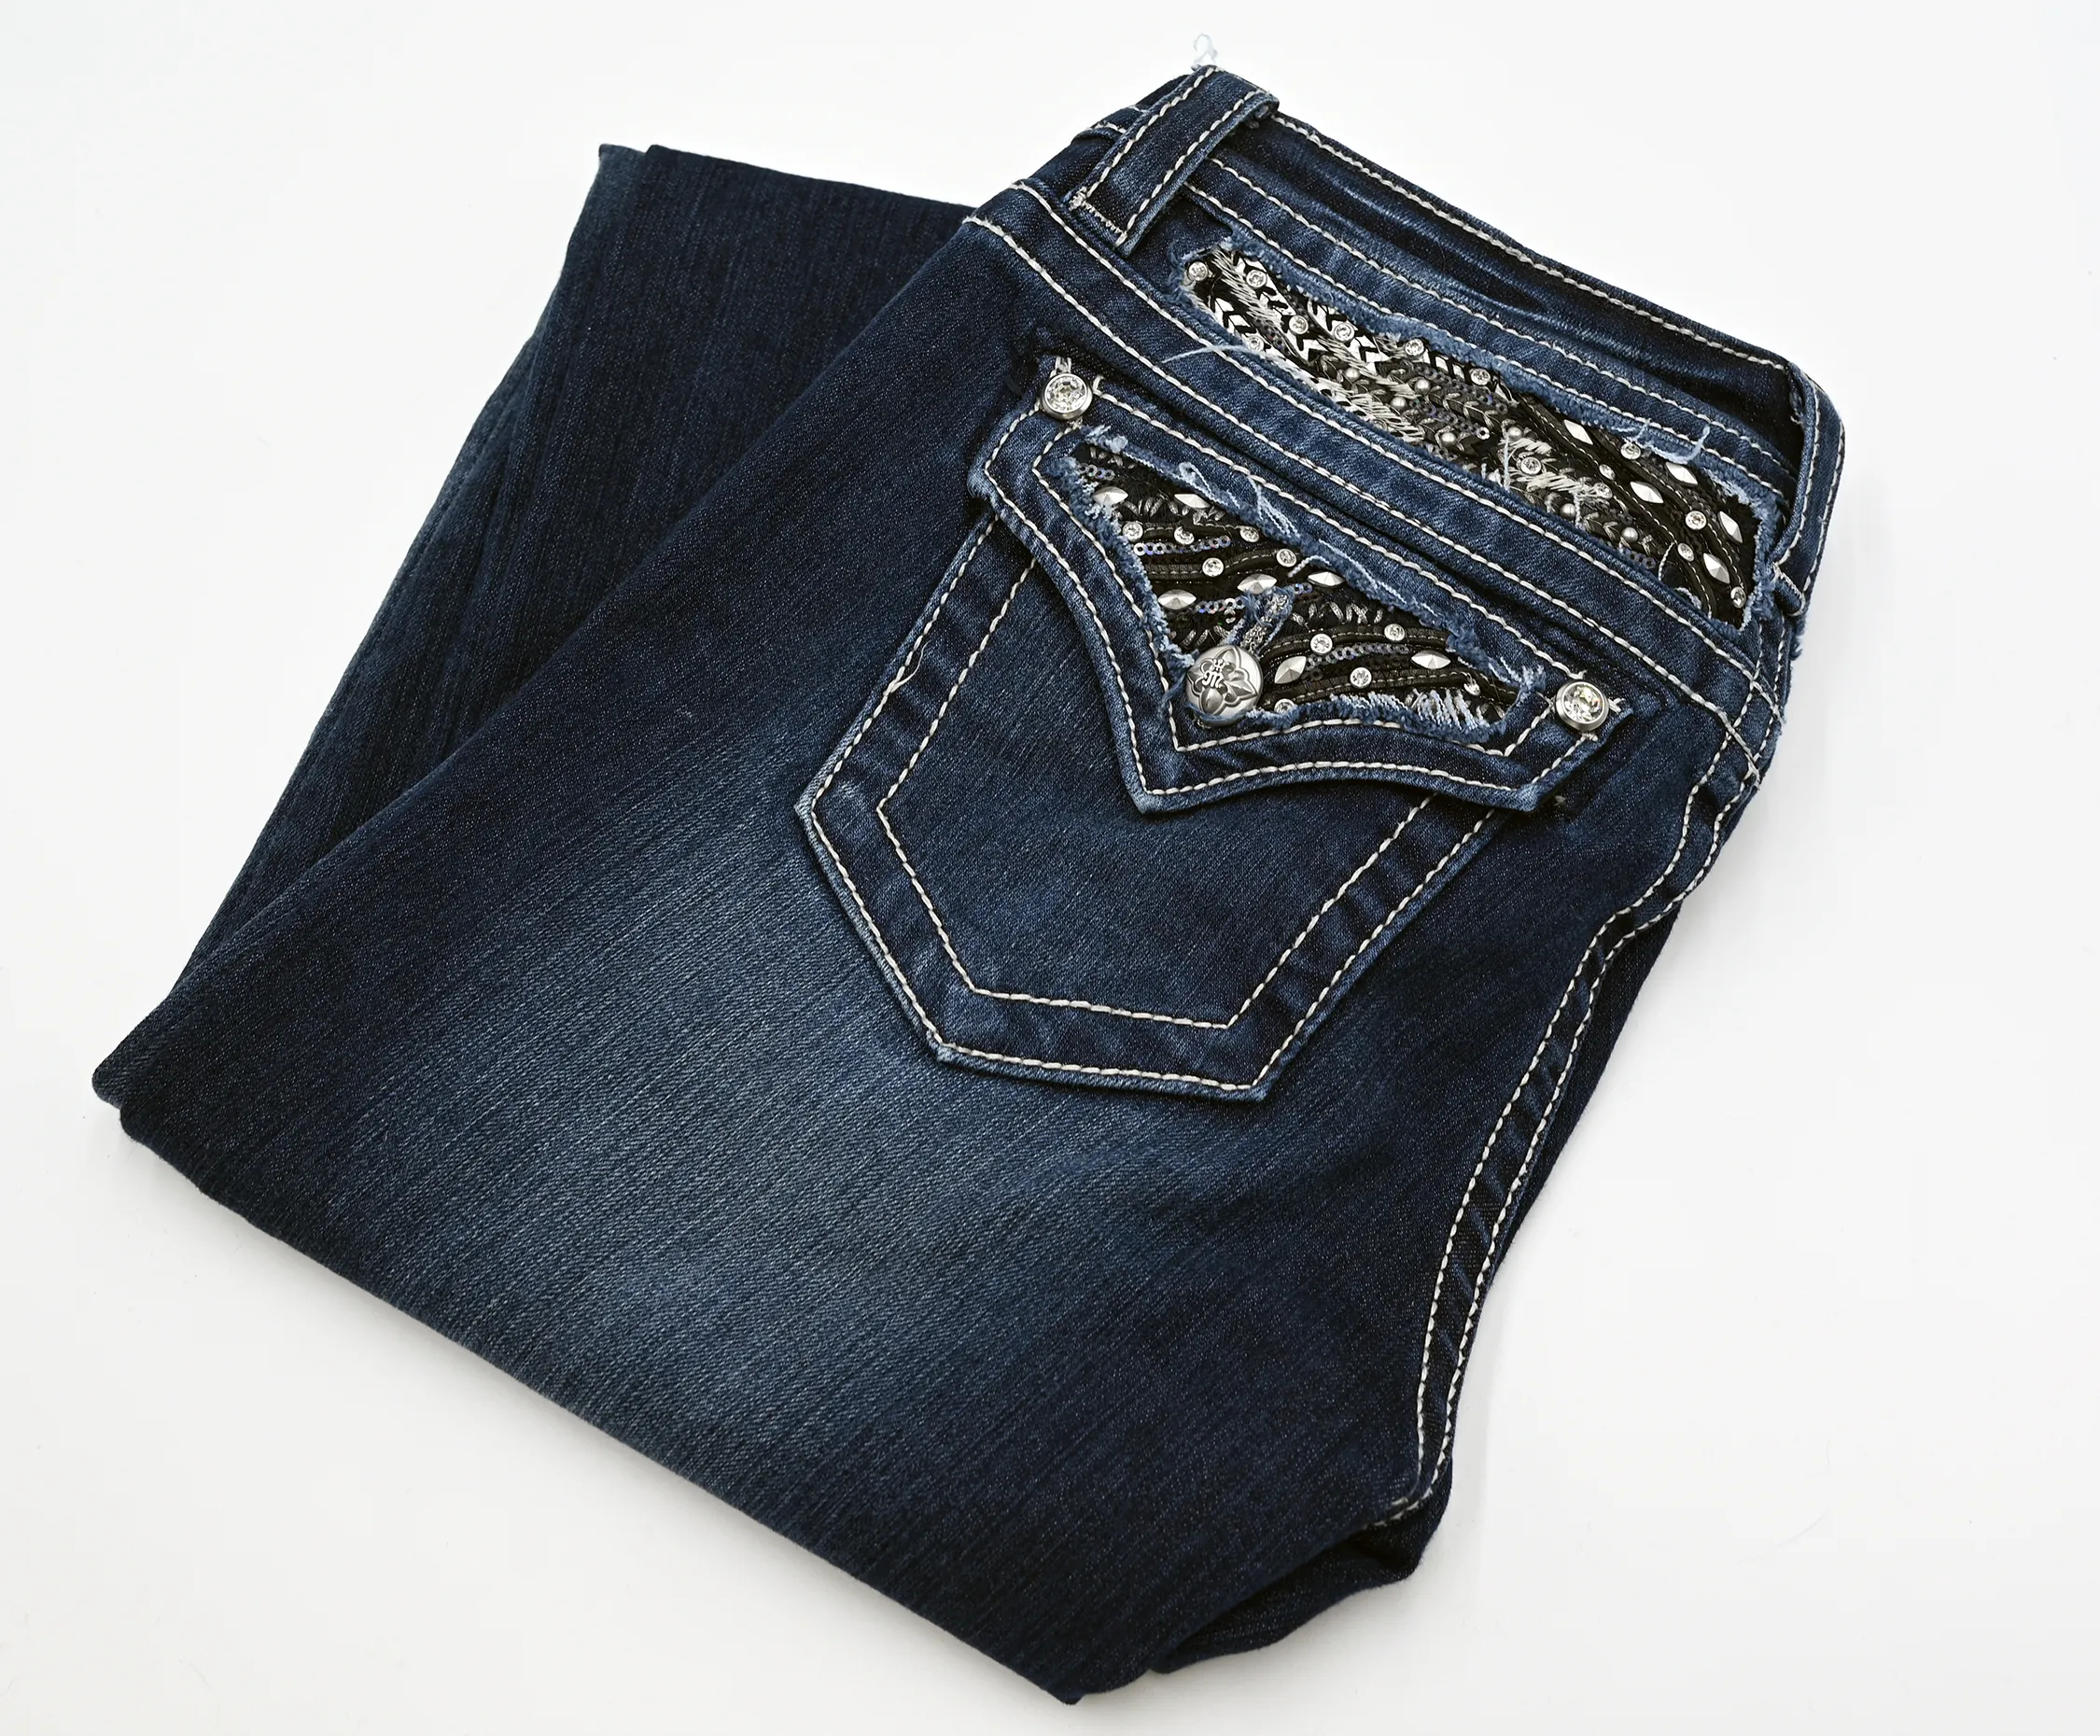 Missme jeans, the history of women's jeans is as rich and varied as the many styles available today. Jeans have evolved from a utilitarian garment into a fashion staple